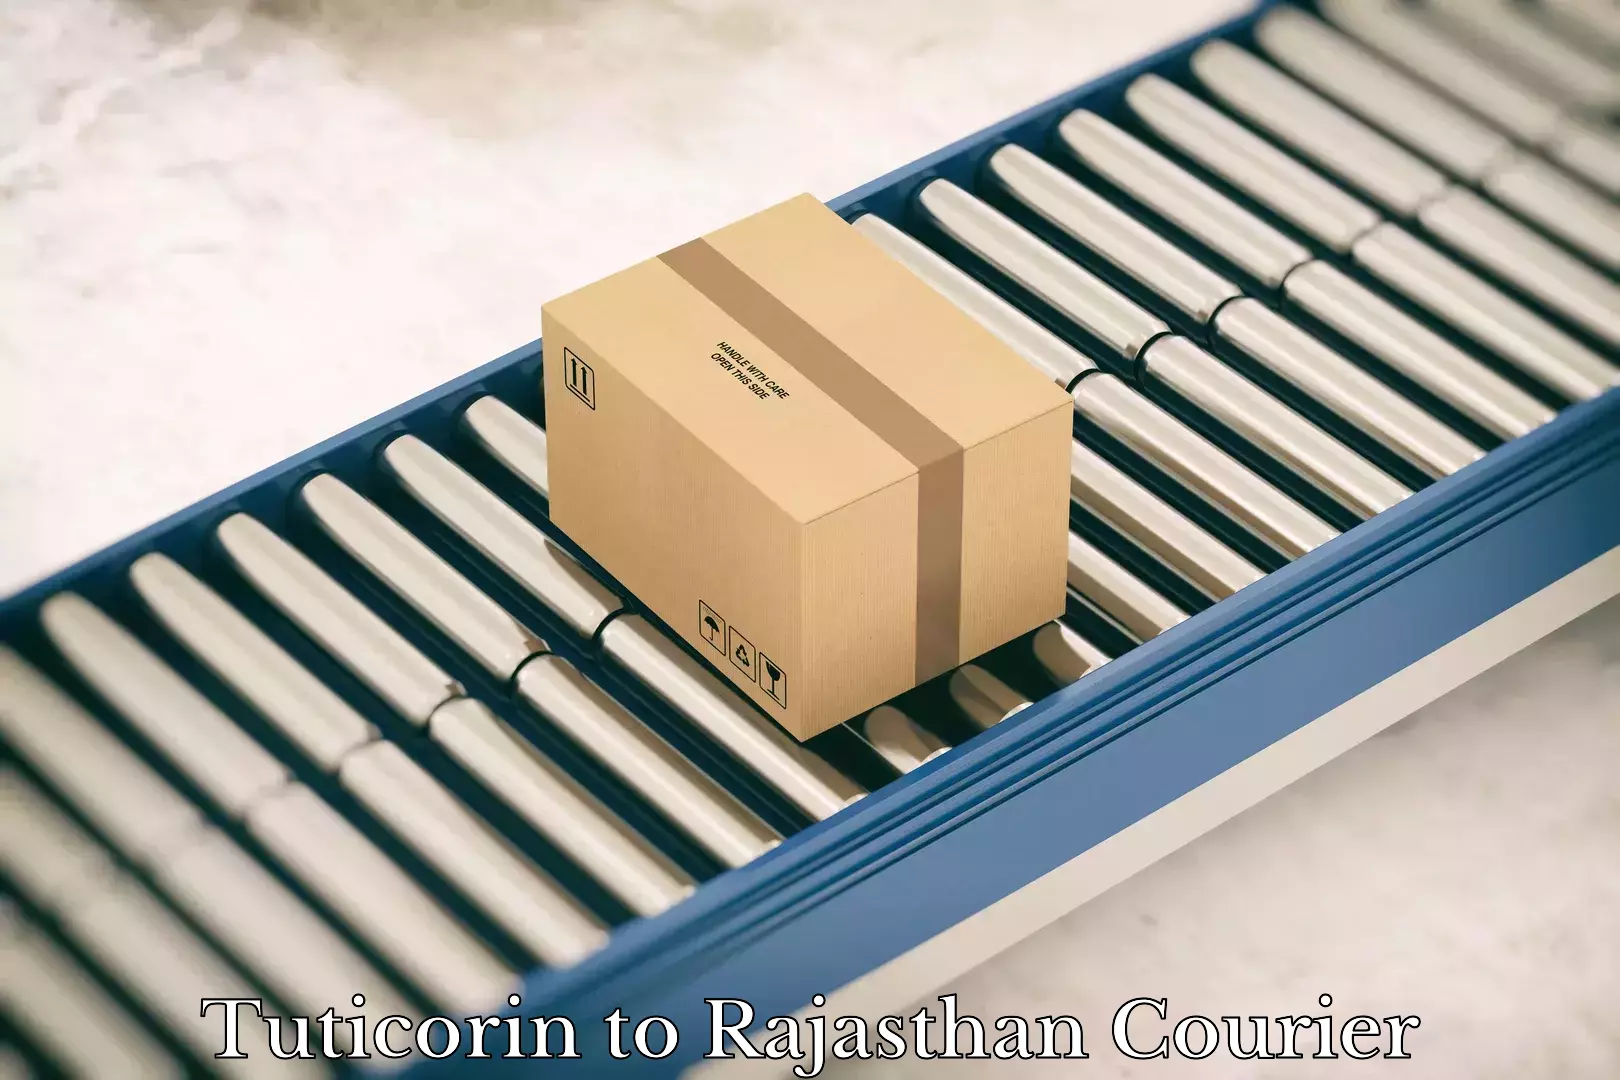 Parcel delivery automation in Tuticorin to Rajasthan